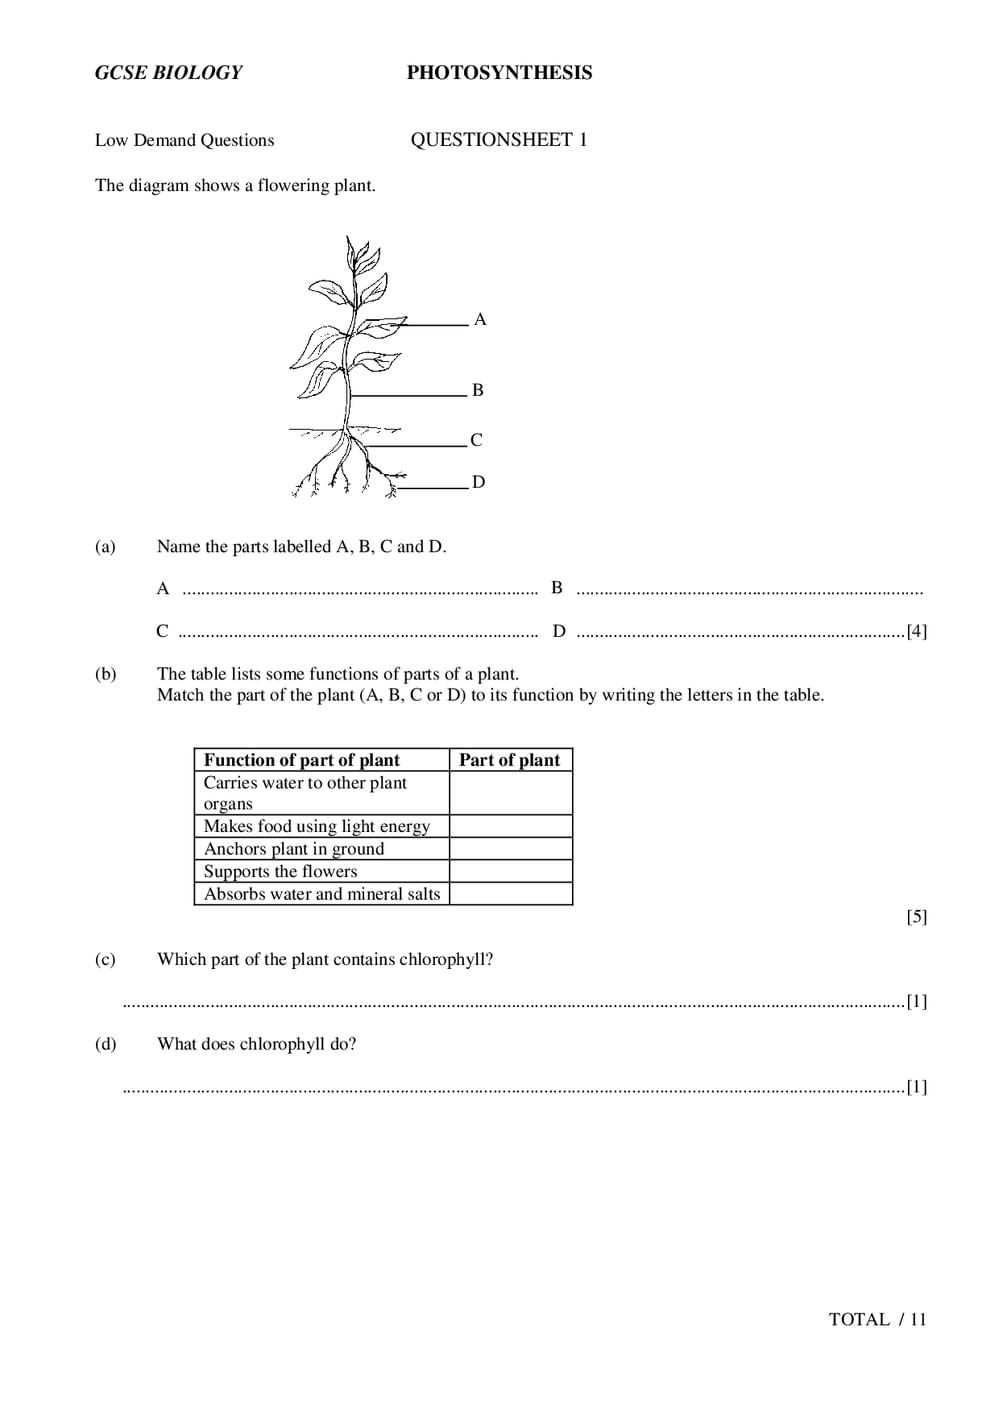 open ended questions on photosynthesis